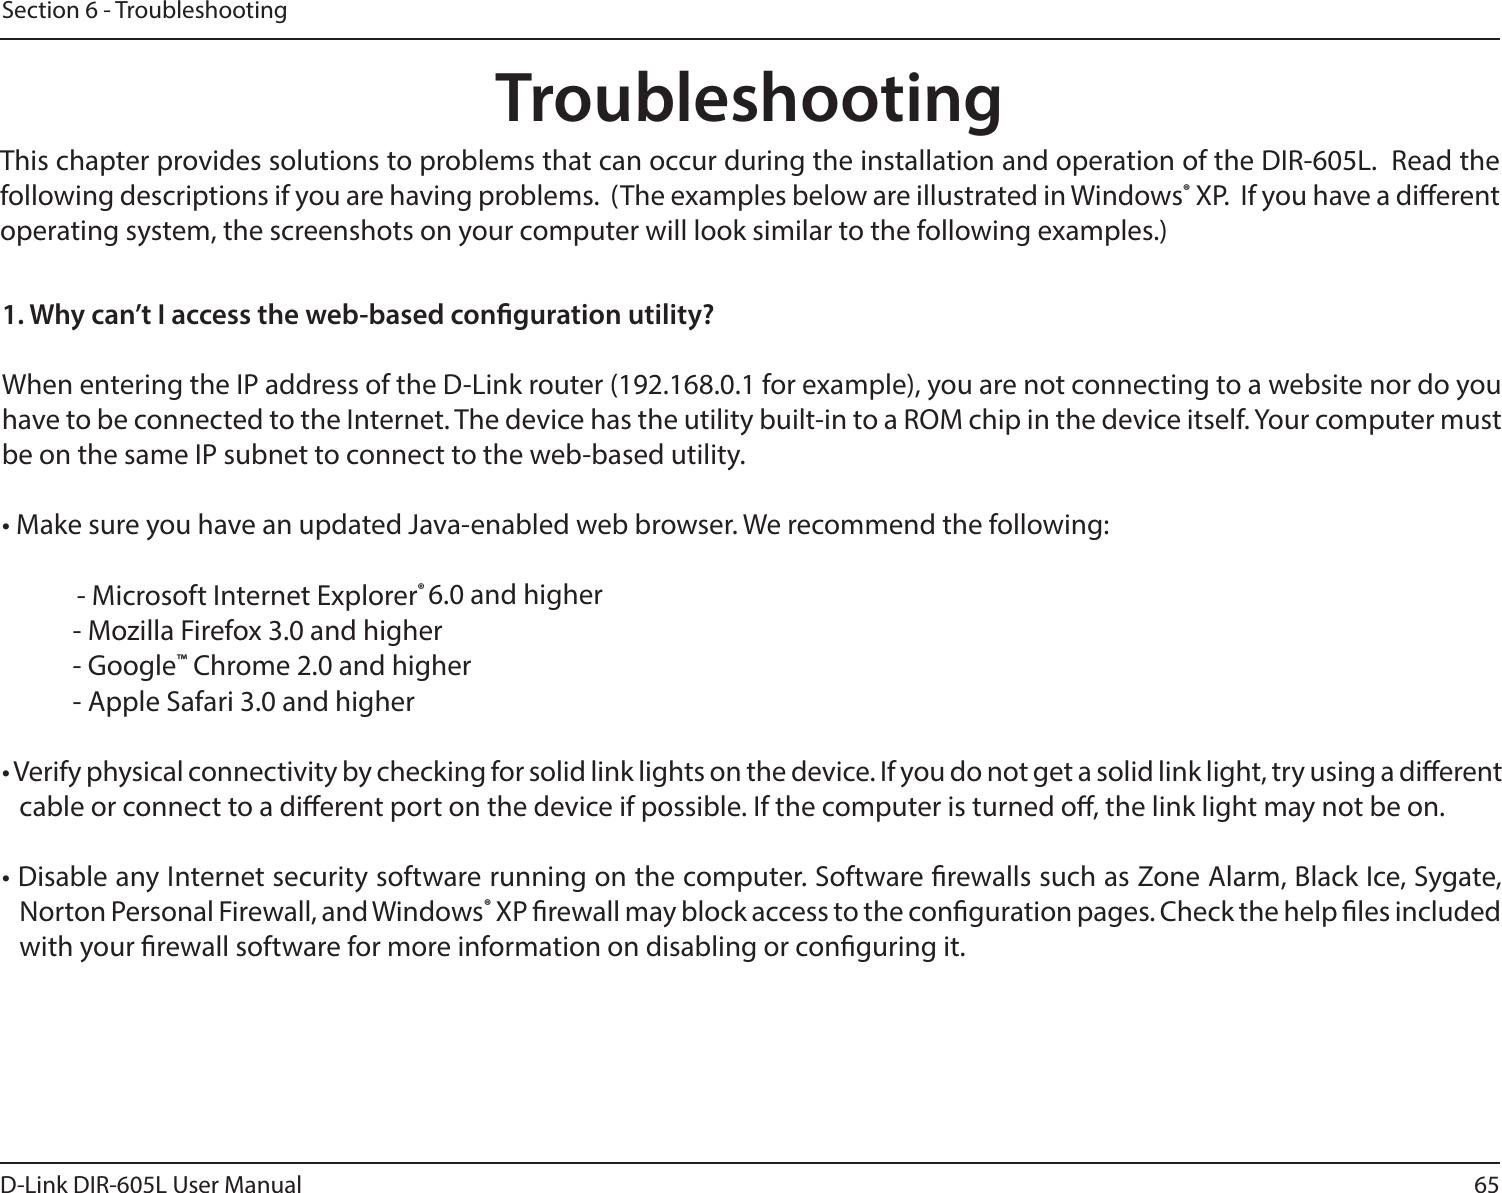 65D-Link DIR-605L User ManualSection 6 - TroubleshootingTroubleshootingThis chapter provides solutions to problems that can occur during the installation and operation of the DIR-605L.  Read the following descriptions if you are having problems.  (The examples below are illustrated in Windows® XP.  If you have a dierent operating system, the screenshots on your computer will look similar to the following examples.)1. Why can’t I access the web-based conguration utility?When entering the IP address of the D-Link router (192.168.0.1 for example), you are not connecting to a website nor do you have to be connected to the Internet. The device has the utility built-in to a ROM chip in the device itself. Your computer must be on the same IP subnet to connect to the web-based utility. • Make sure you have an updated Java-enabled web browser. We recommend the following:    - Microsoft Internet Explorer® 6.0 and higher- Mozilla Firefox 3.0 and higher- Google™ Chrome 2.0 and higher- Apple Safari 3.0 and higher• Verify physical connectivity by checking for solid link lights on the device. If you do not get a solid link light, try using a dierent cable or connect to a dierent port on the device if possible. If the computer is turned o, the link light may not be on.• Disable any Internet security software running on the computer. Software rewalls such as Zone Alarm, Black Ice, Sygate, Norton Personal Firewall, and Windows® XP rewall may block access to the conguration pages. Check the help les included with your rewall software for more information on disabling or conguring it.